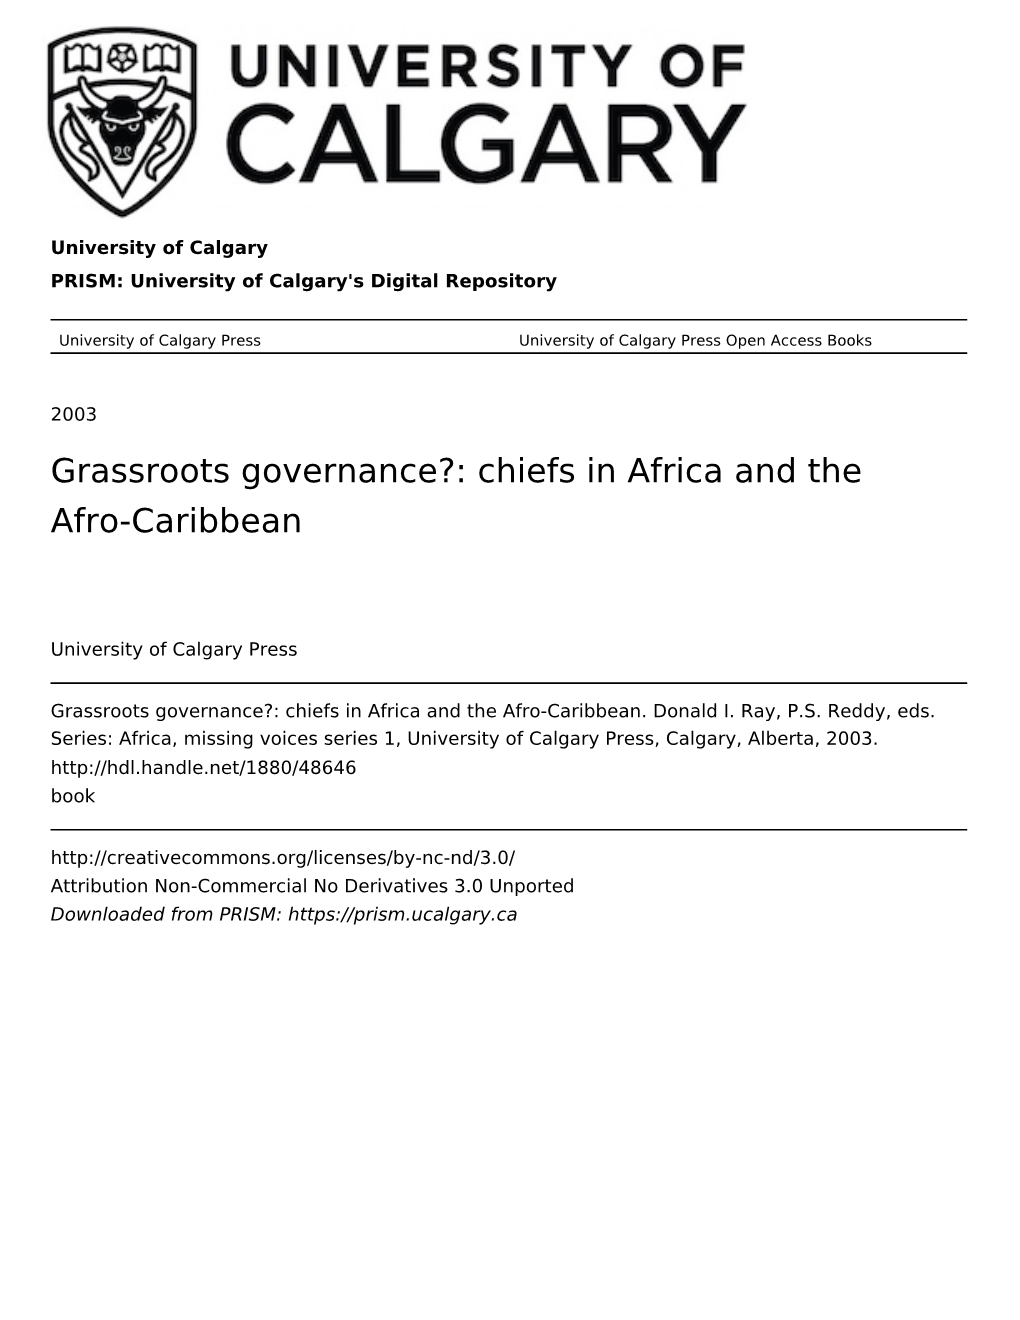 Grassroots Governance?: Chiefs in Africa and the Afro-Caribbean